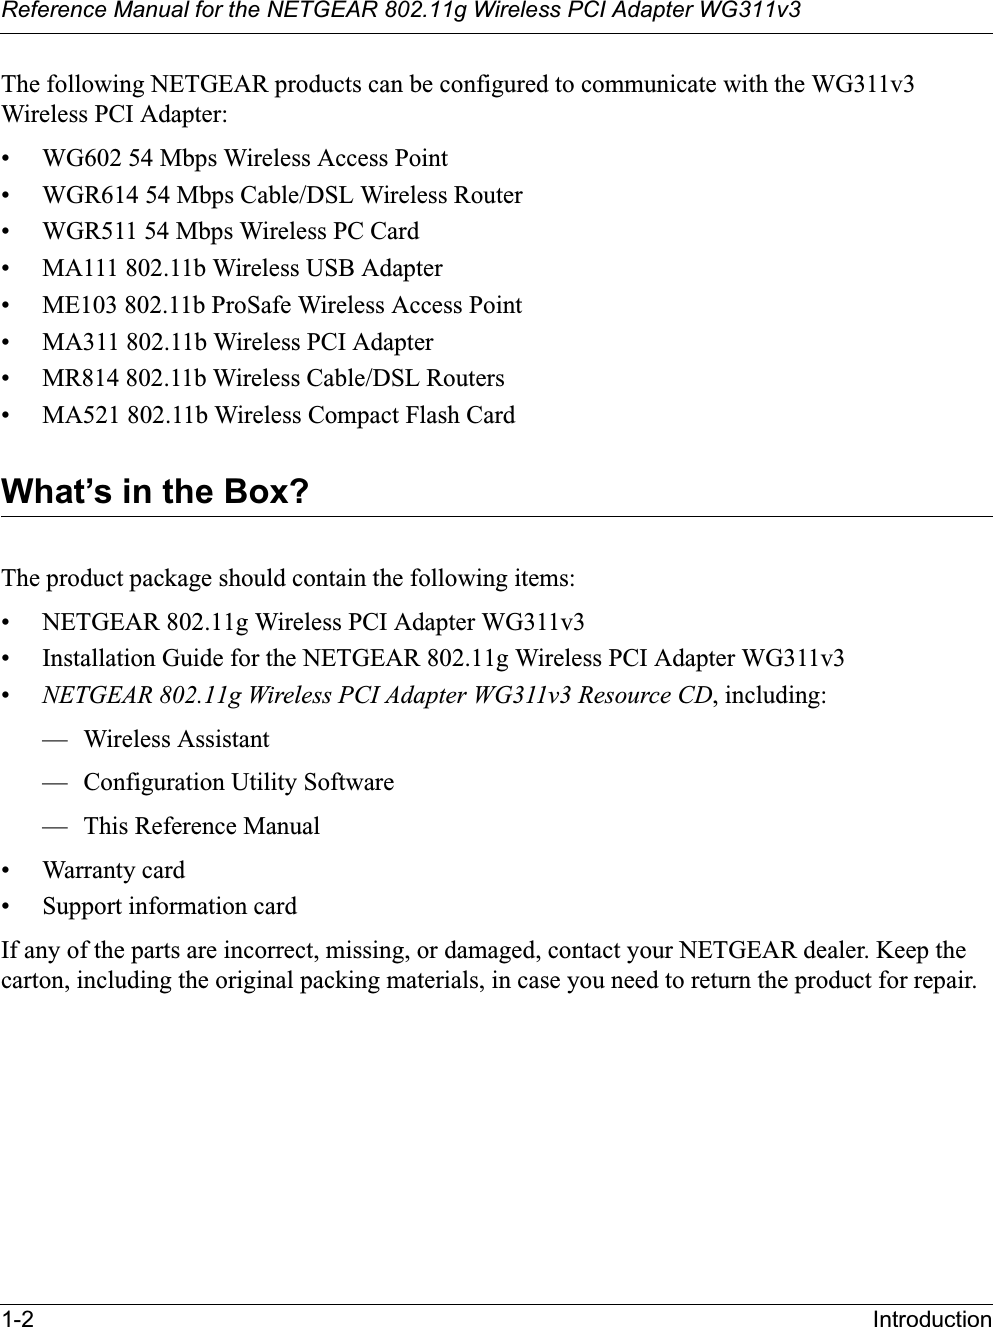 Reference Manual for the NETGEAR 802.11g Wireless PCI Adapter WG311v31-2 IntroductionThe following NETGEAR products can be configured to communicate with the WG311v3Wireless PCI Adapter:• WG602 54 Mbps Wireless Access Point• WGR614 54 Mbps Cable/DSL Wireless Router• WGR511 54 Mbps Wireless PC Card• MA111 802.11b Wireless USB Adapter• ME103 802.11b ProSafe Wireless Access Point• MA311 802.11b Wireless PCI Adapter• MR814 802.11b Wireless Cable/DSL Routers• MA521 802.11b Wireless Compact Flash CardWhat’s in the Box?The product package should contain the following items:• NETGEAR 802.11g Wireless PCI Adapter WG311v3• Installation Guide for the NETGEAR 802.11g Wireless PCI Adapter WG311v3•NETGEAR 802.11g Wireless PCI Adapter WG311v3 Resource CD, including:— Wireless Assistant— Configuration Utility Software— This Reference Manual• Warranty card• Support information cardIf any of the parts are incorrect, missing, or damaged, contact your NETGEAR dealer. Keep the carton, including the original packing materials, in case you need to return the product for repair.